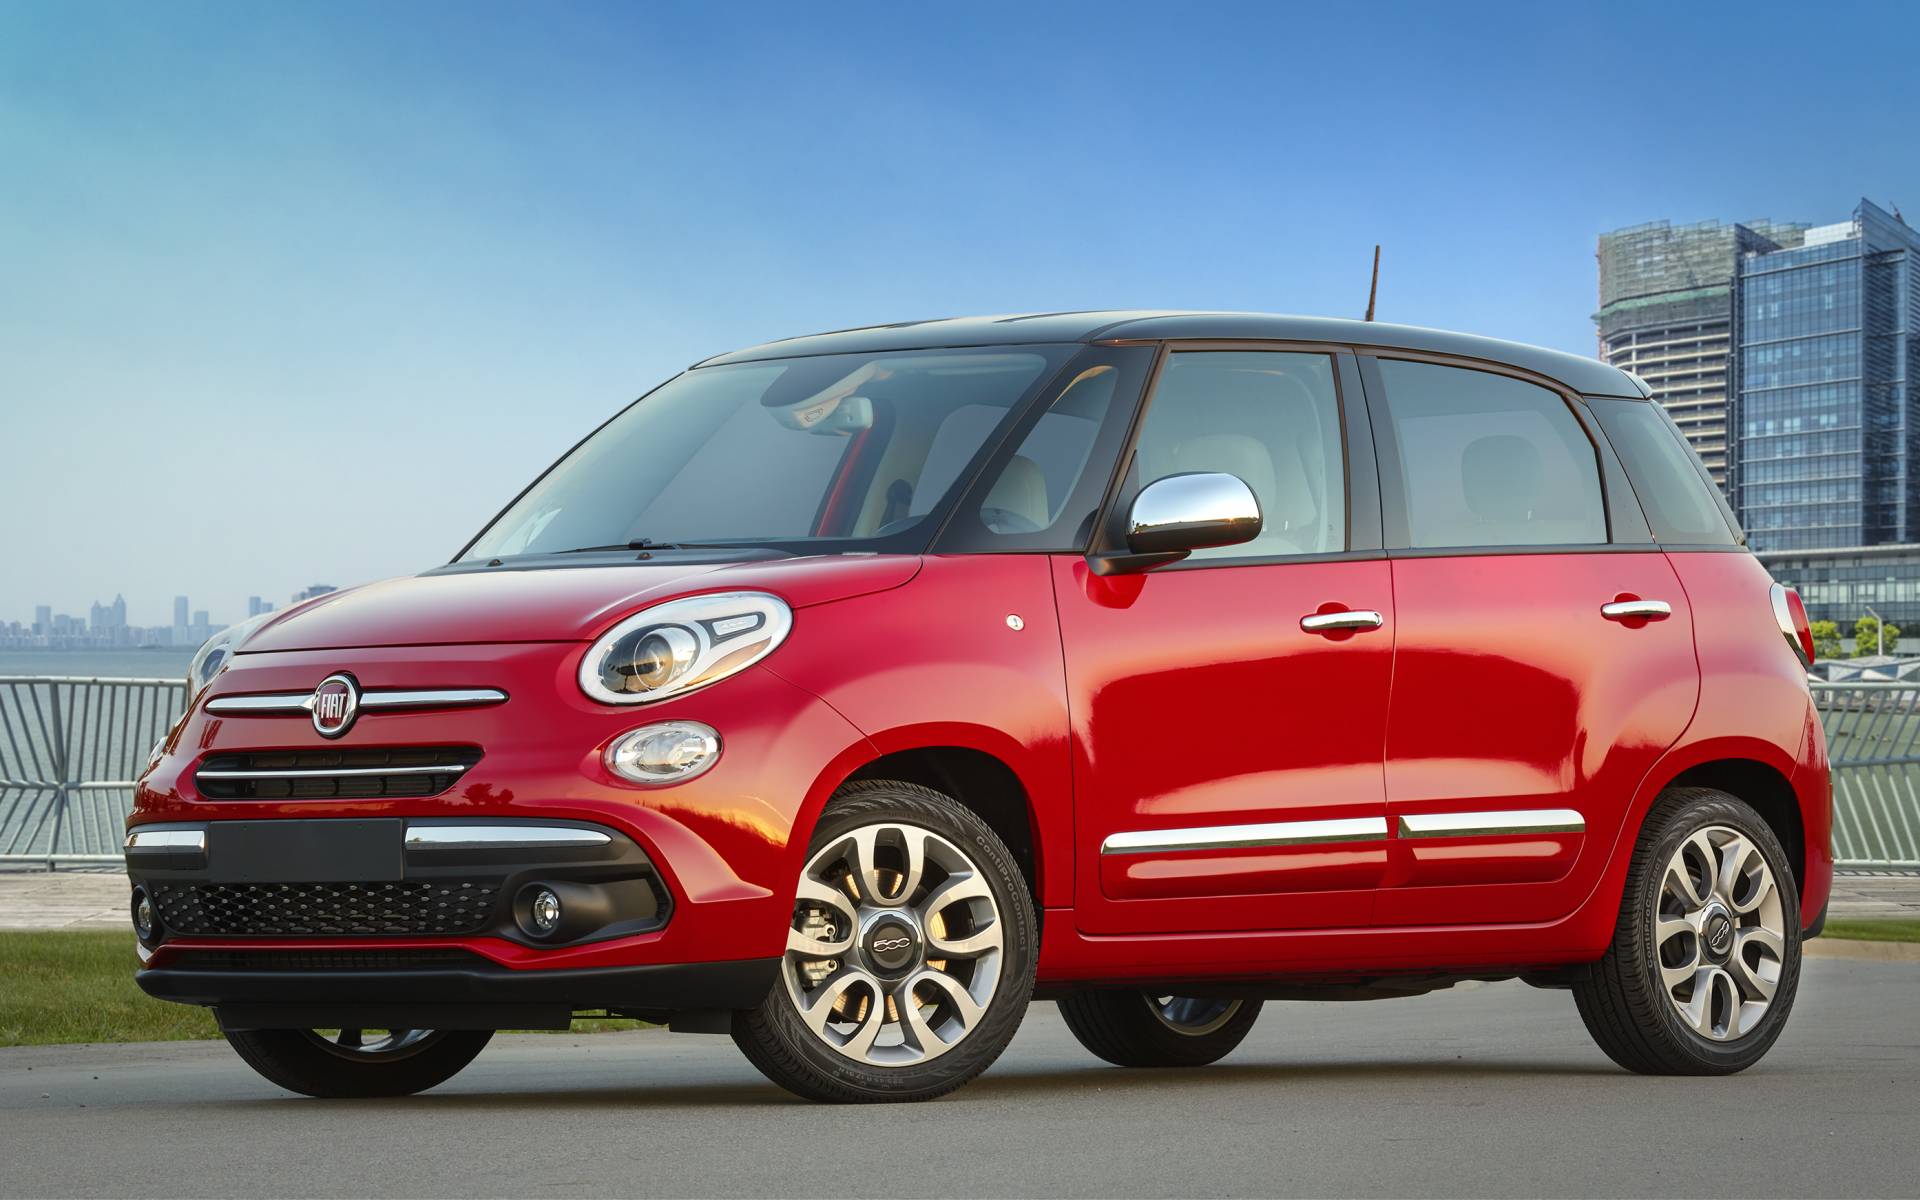 2019 Fiat 500L - News, reviews, picture galleries and videos - The Car Guide